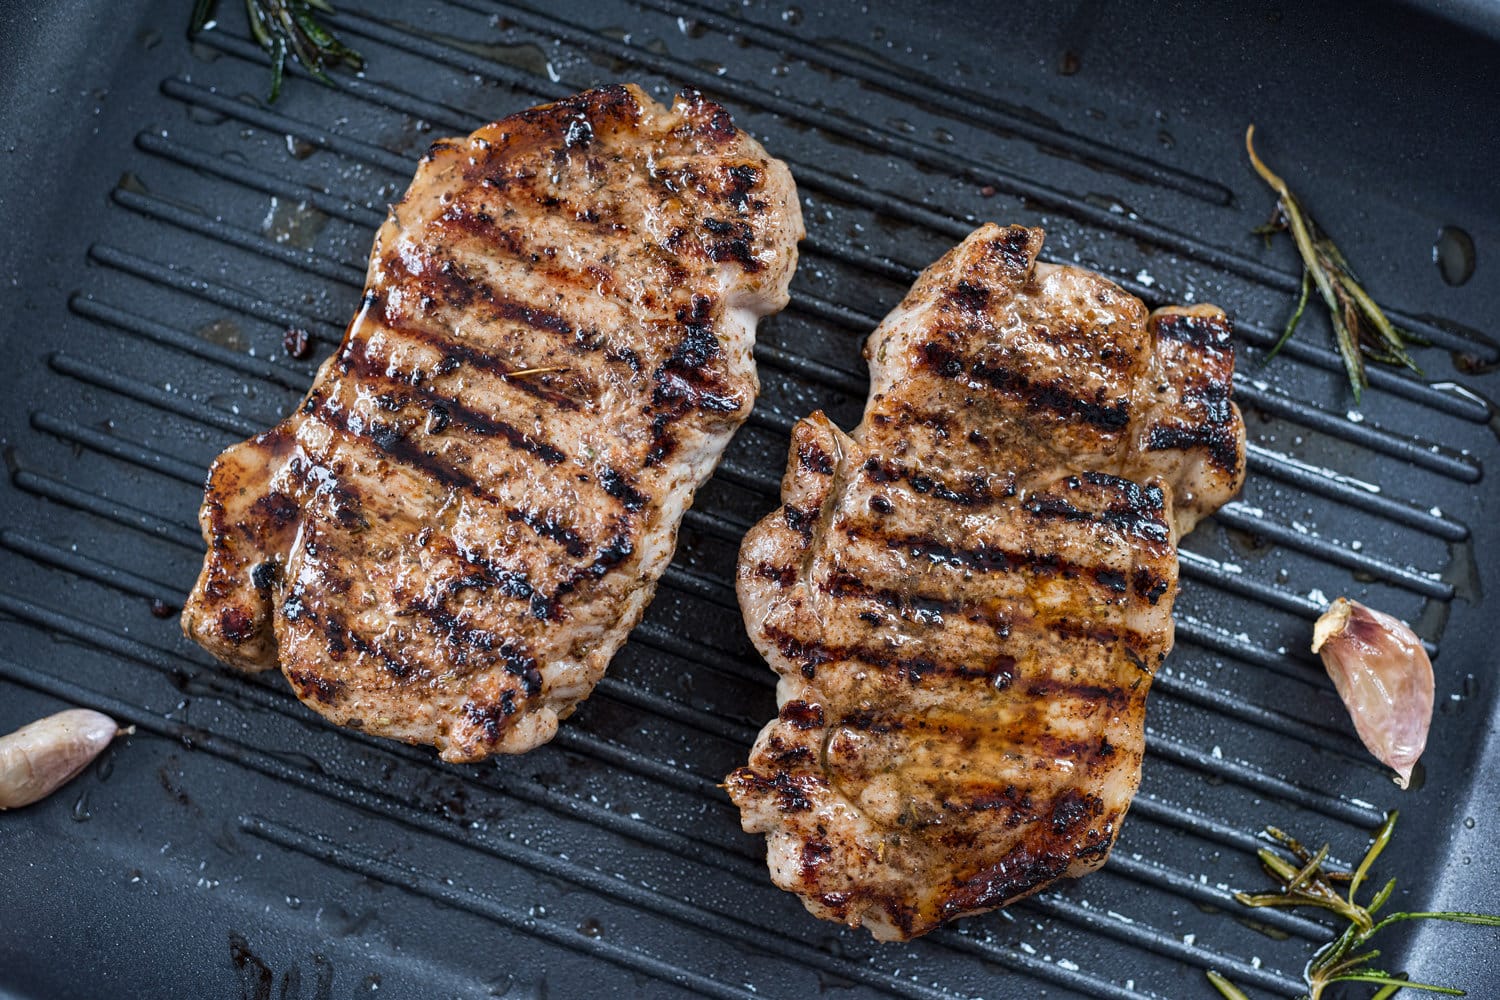 Two Grilled Steaks On a Grill Pan. 